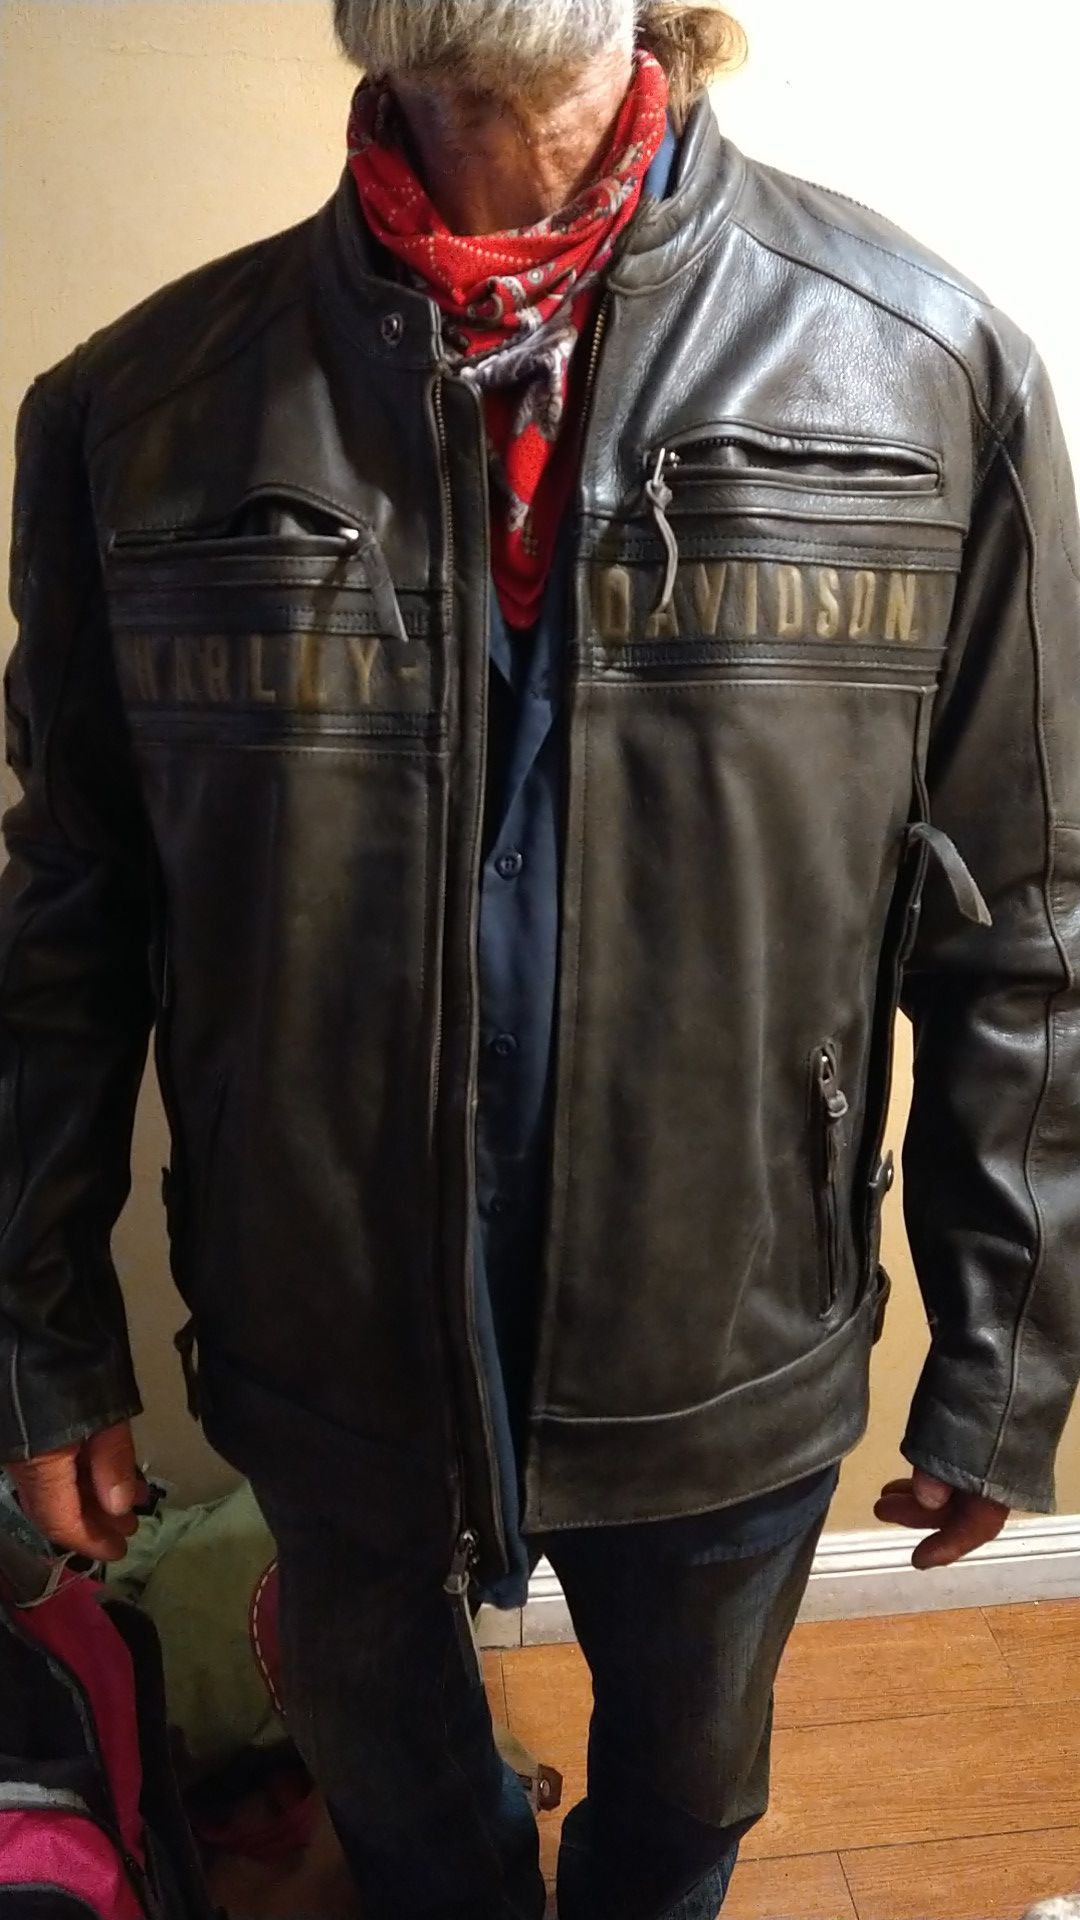 Harley Davidson triple ventilated leather jacket recently conditioned to its original finish .